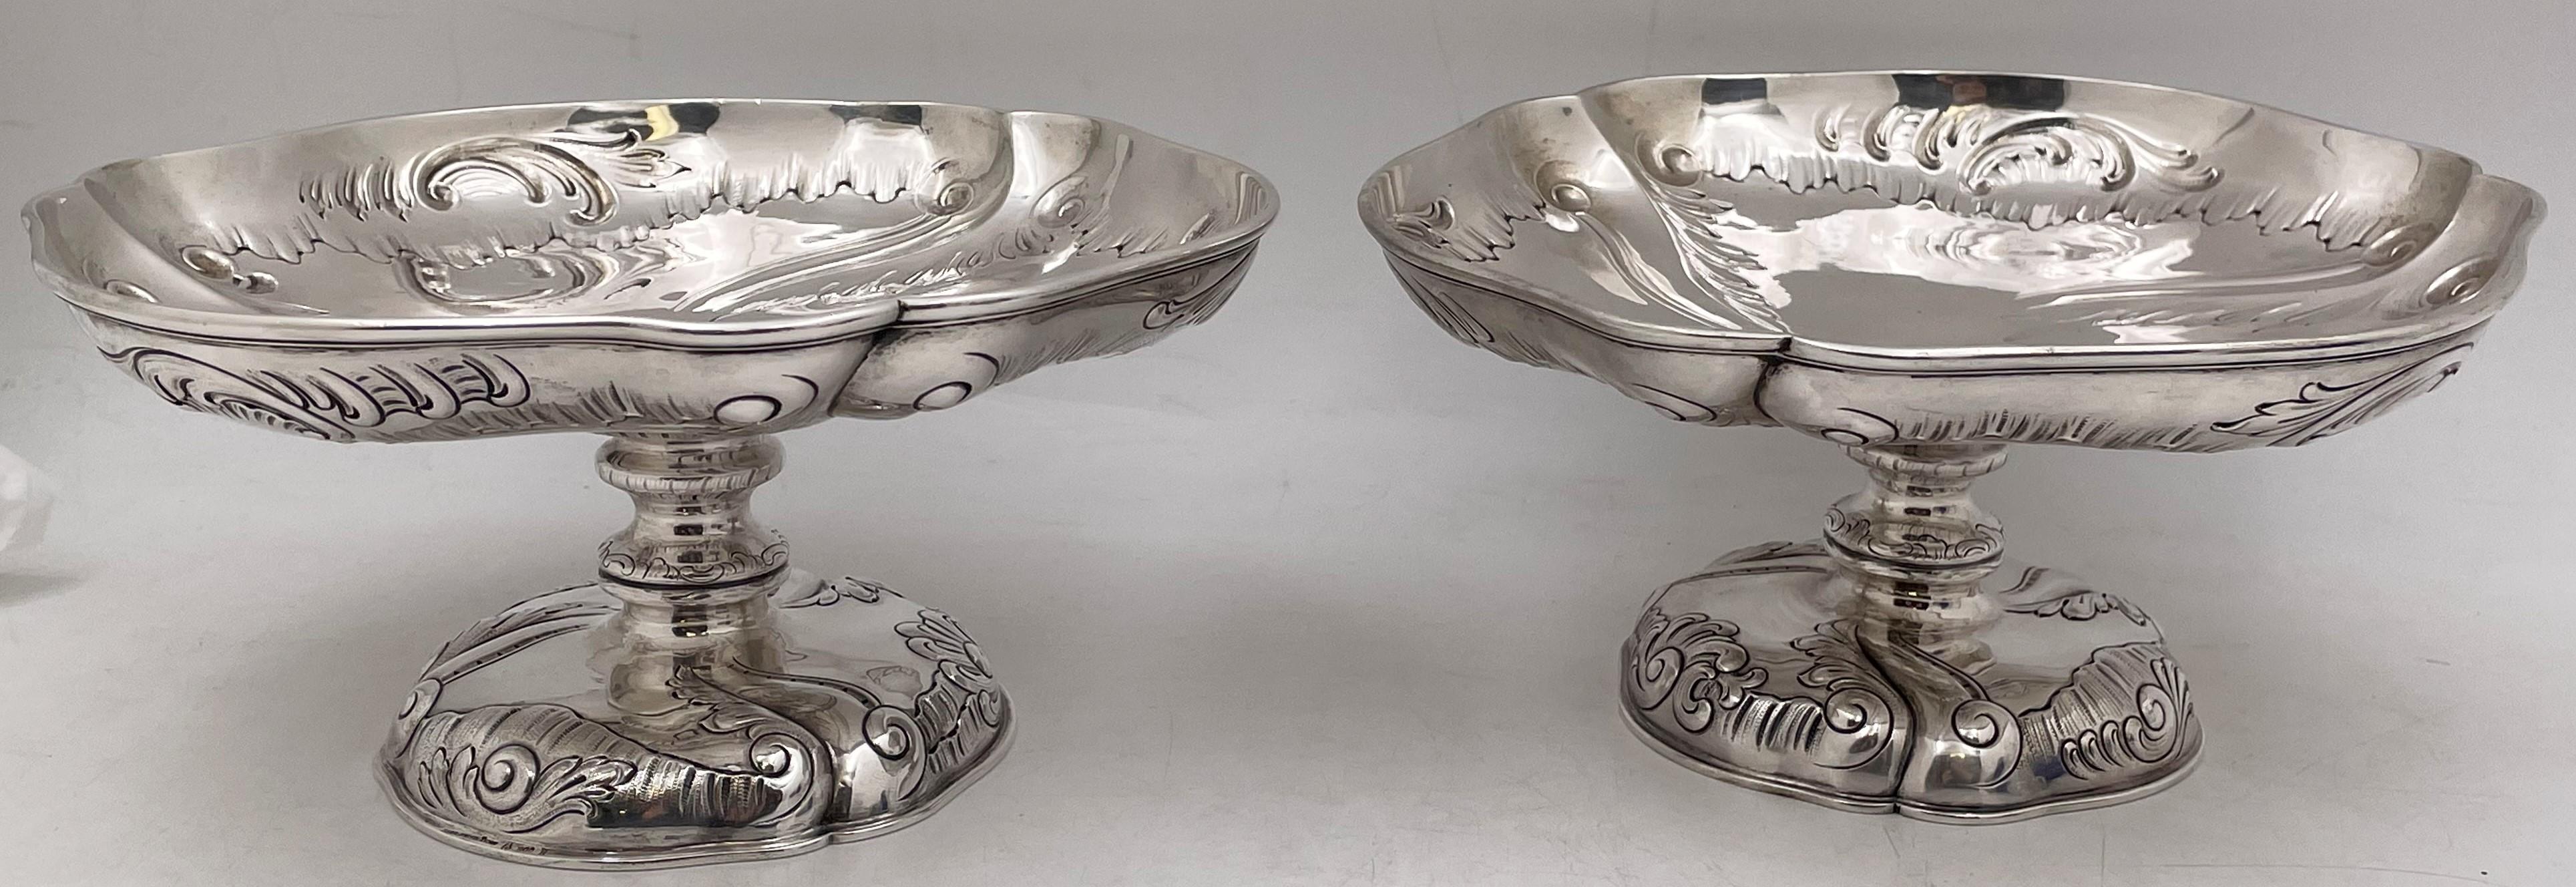 Rococo Pair of Friedlander Royal Maker Continental Silver 19th Century Tazza / Bowls For Sale